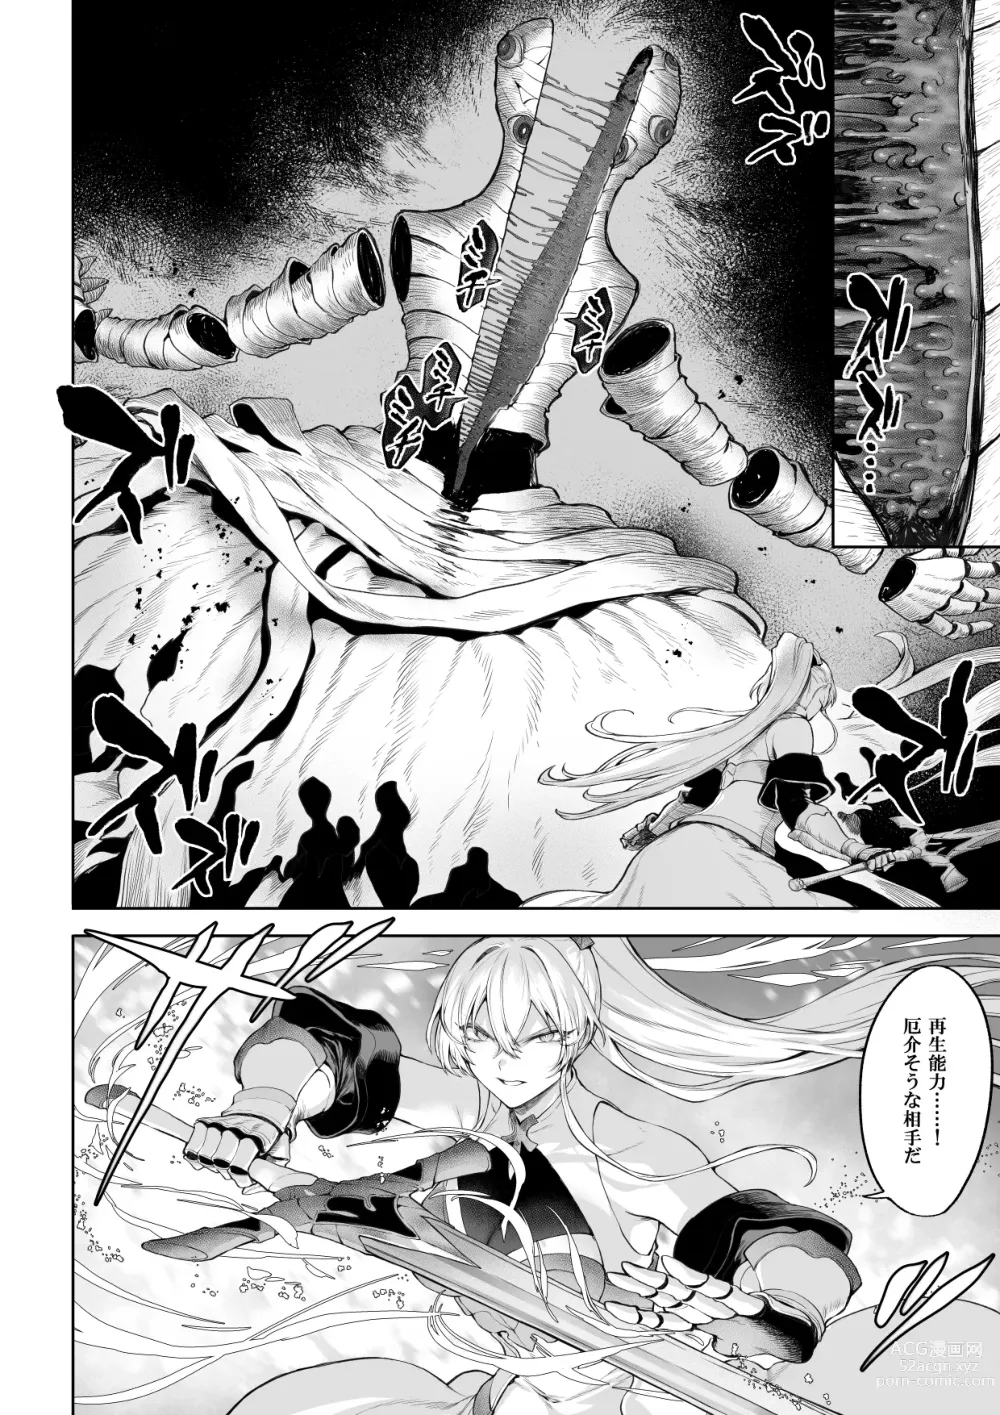 Page 133 of doujinshi 戦乙女といくさごと！〜女魔法使い編〜